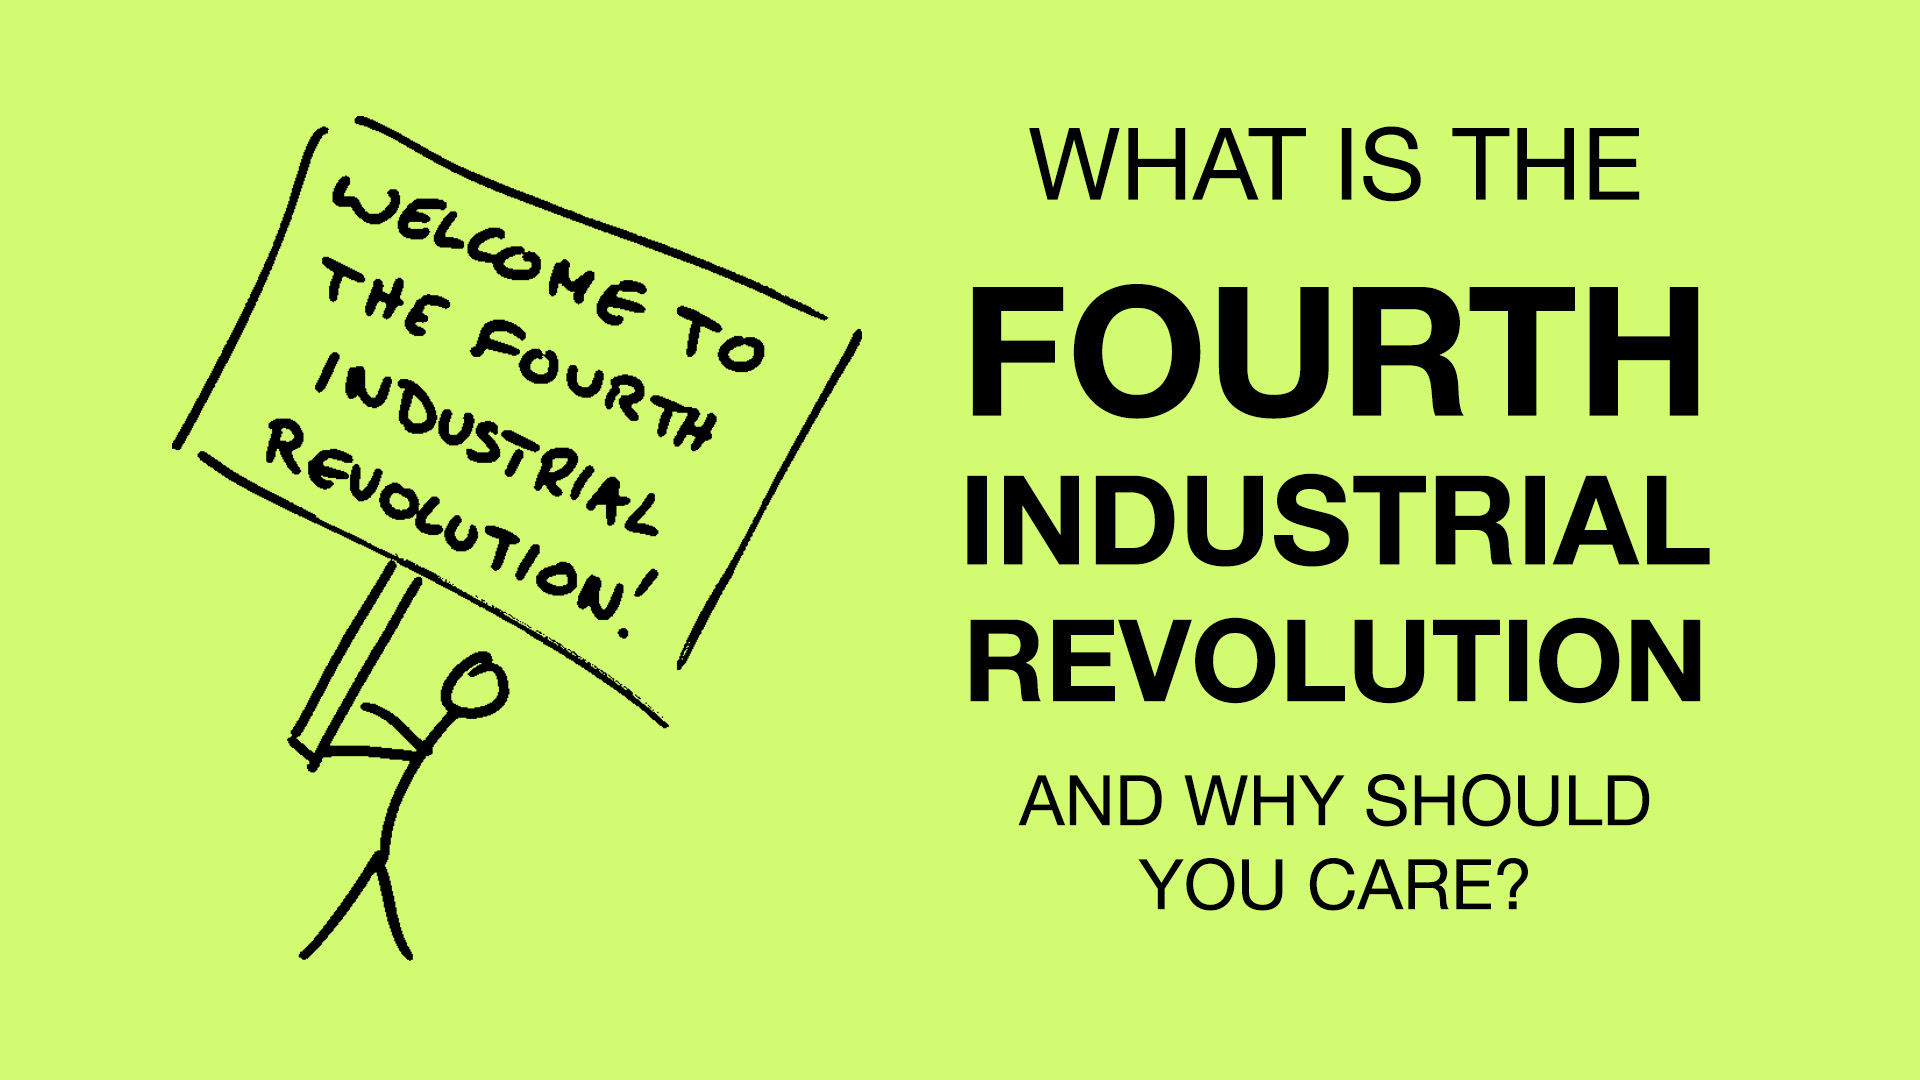 What is the Fourth Industrial Revolution, and why should you care?